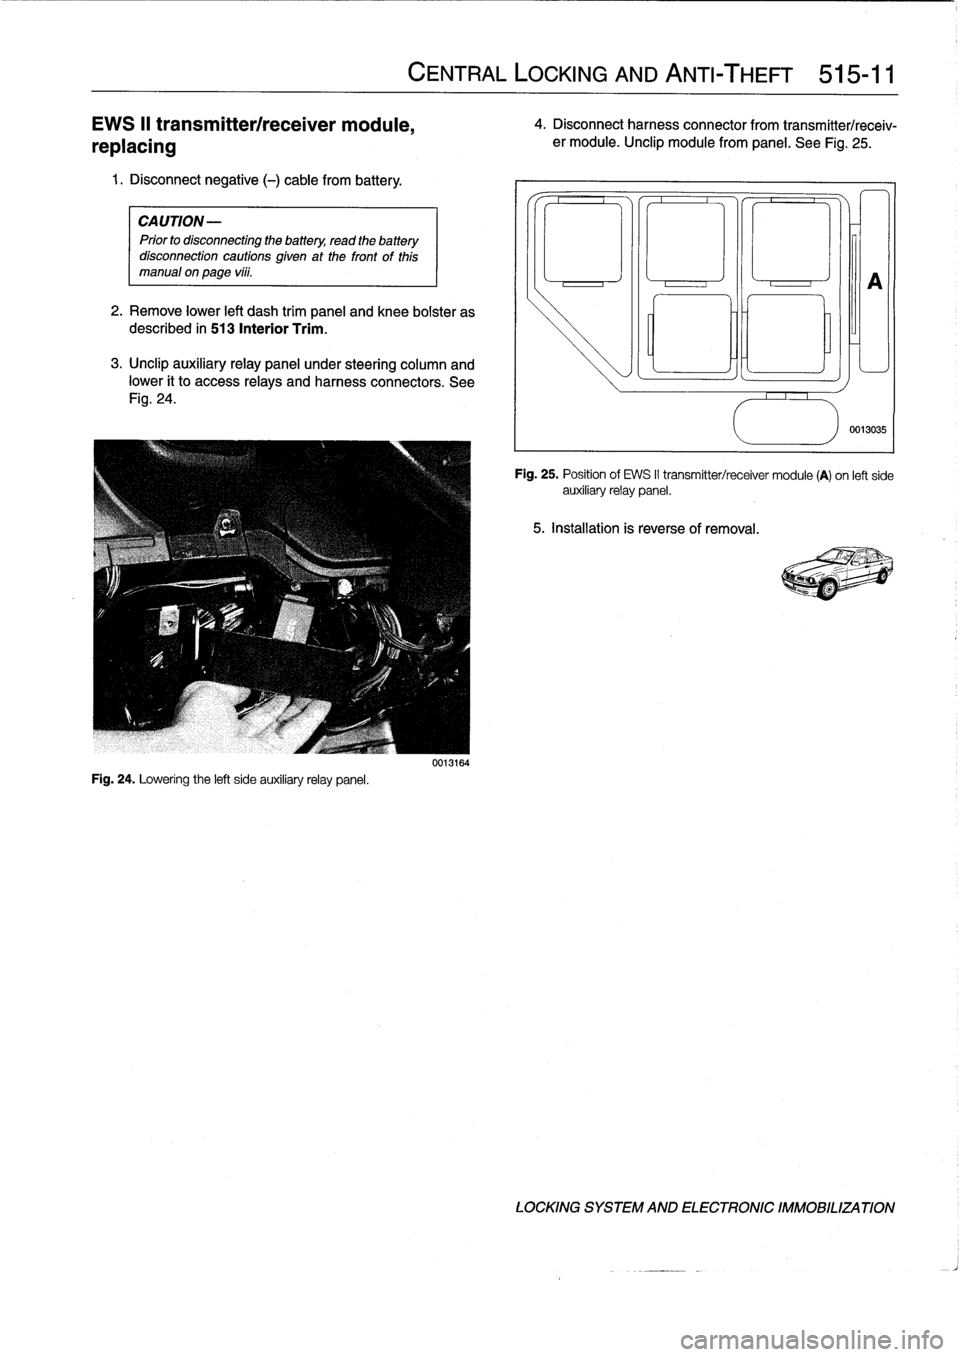 BMW 318i 1992 E36 Workshop Manual 
EWS
II
transmitterlreceiver
module,

replacing

1
.
Disconnect
negative
(-)
cable
from
battery
.

CAUTION-

Prior
to
disconnectiog
the
battery,
read
the
battery
disconnection
cautions
given
at
the
fr